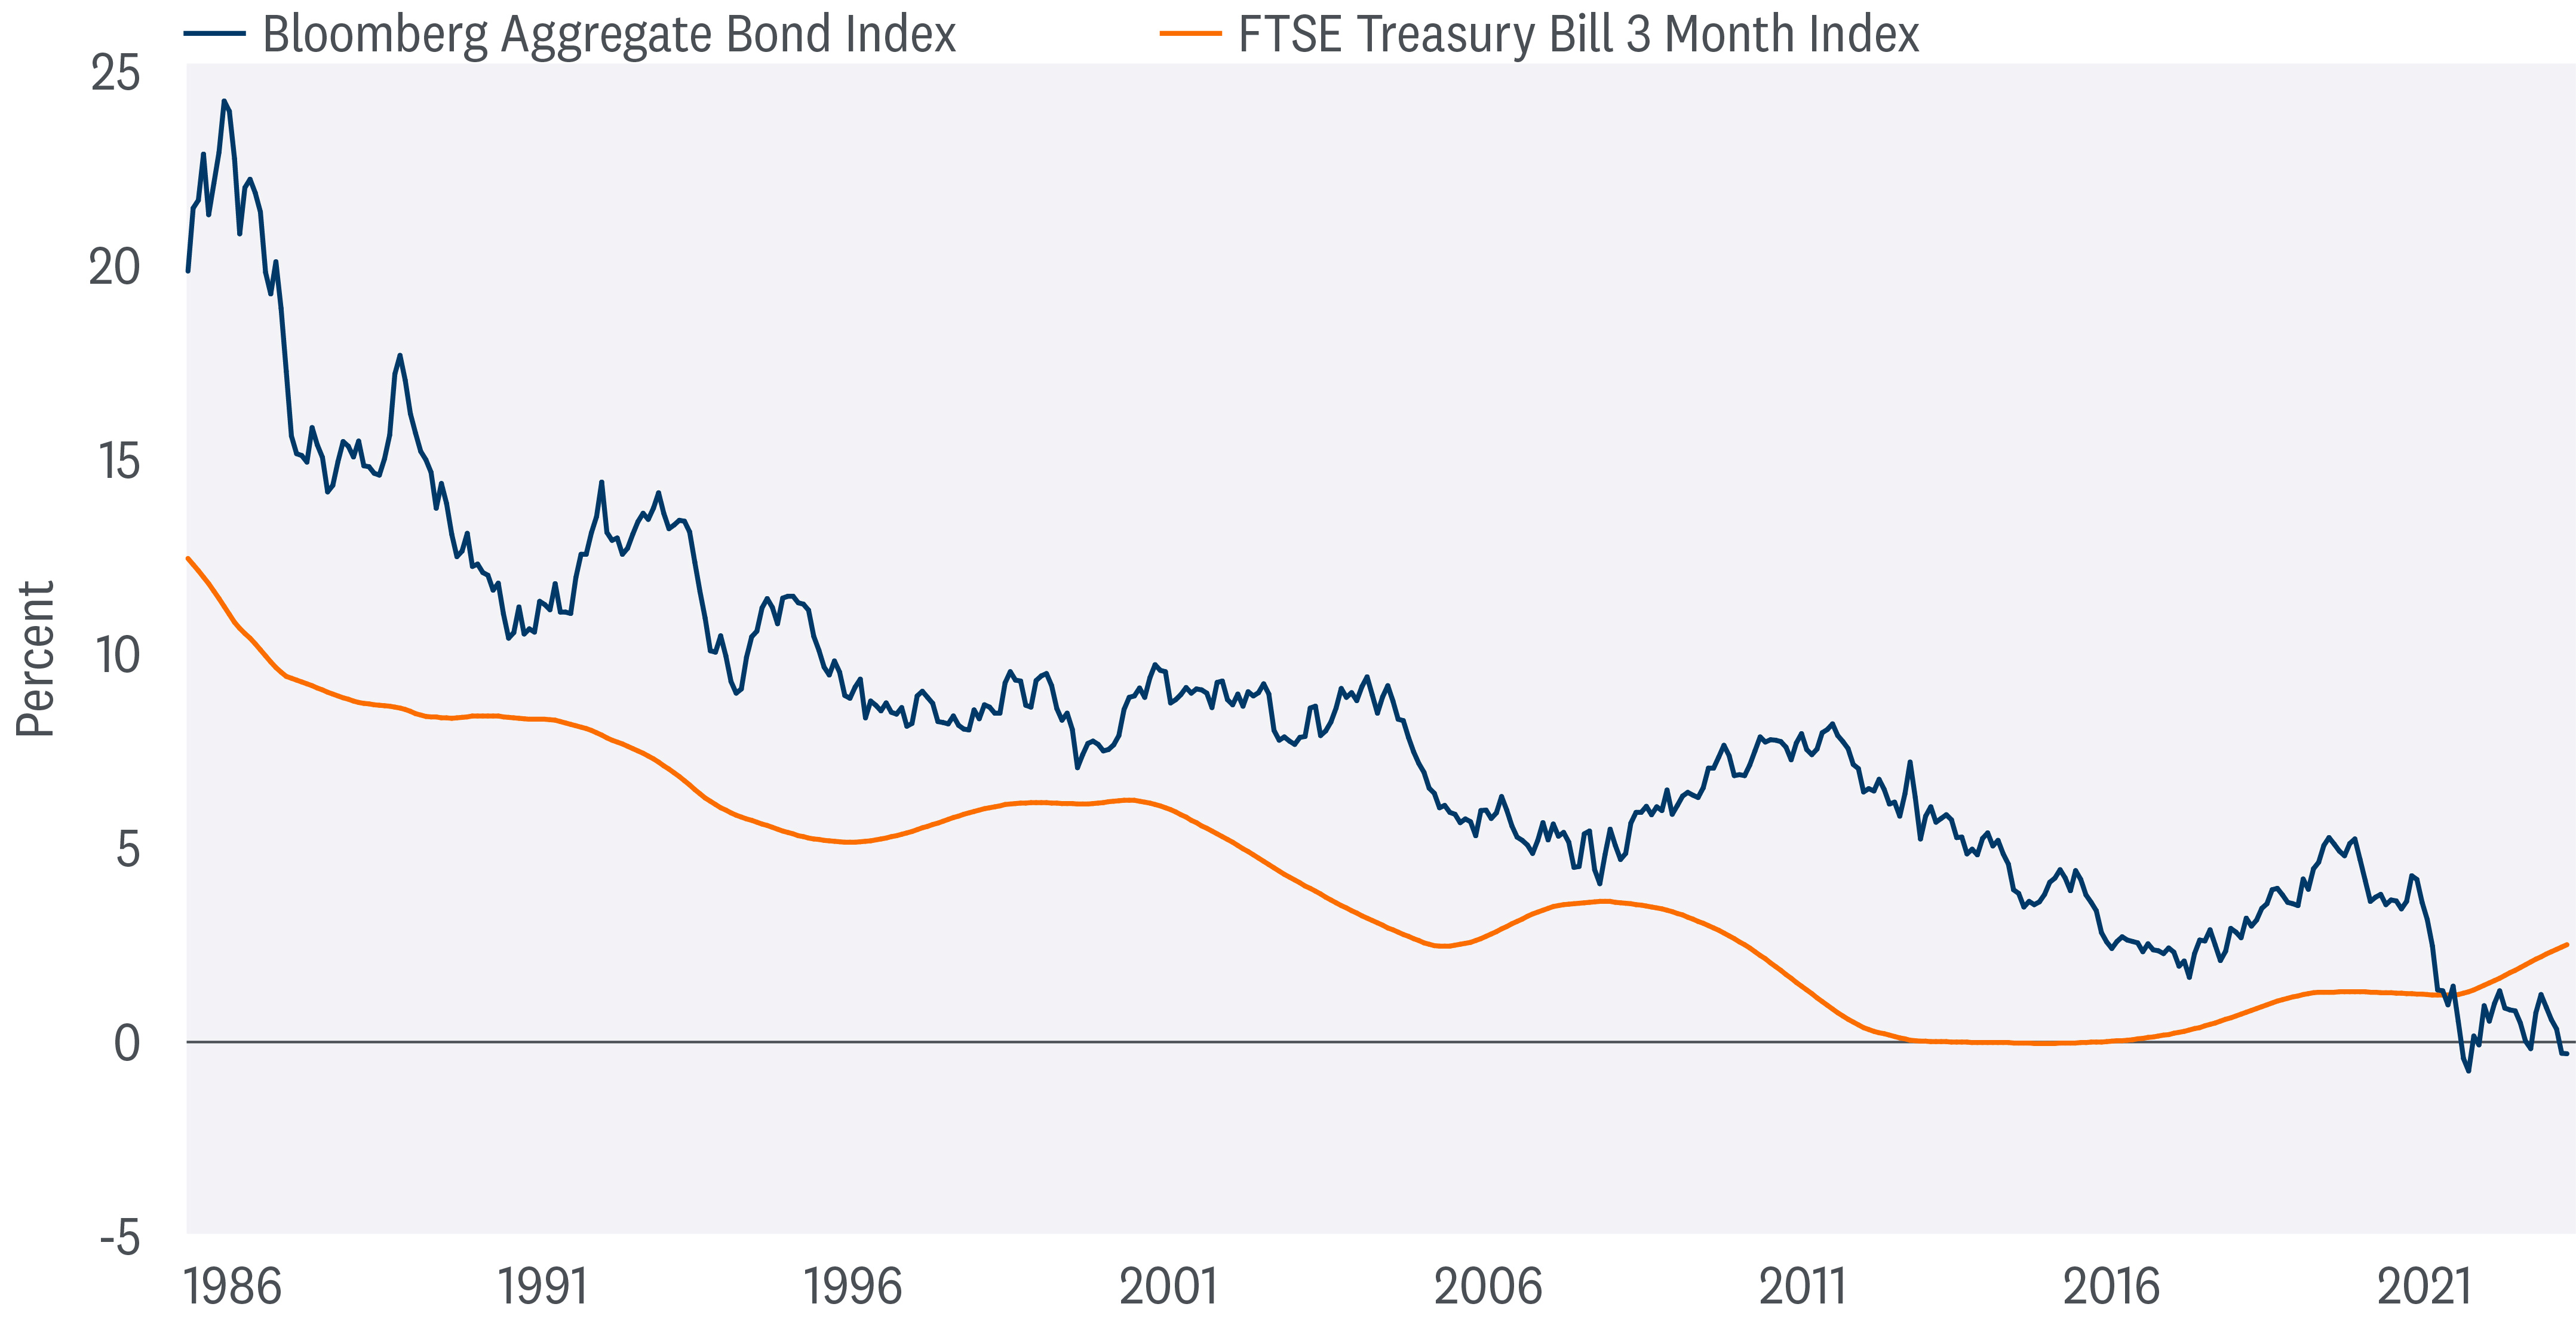 The chart plots the Bloomberg Aggregate Bond Index and the FTSE Treasury Bill 3 Month Index from 1986 to 2021.